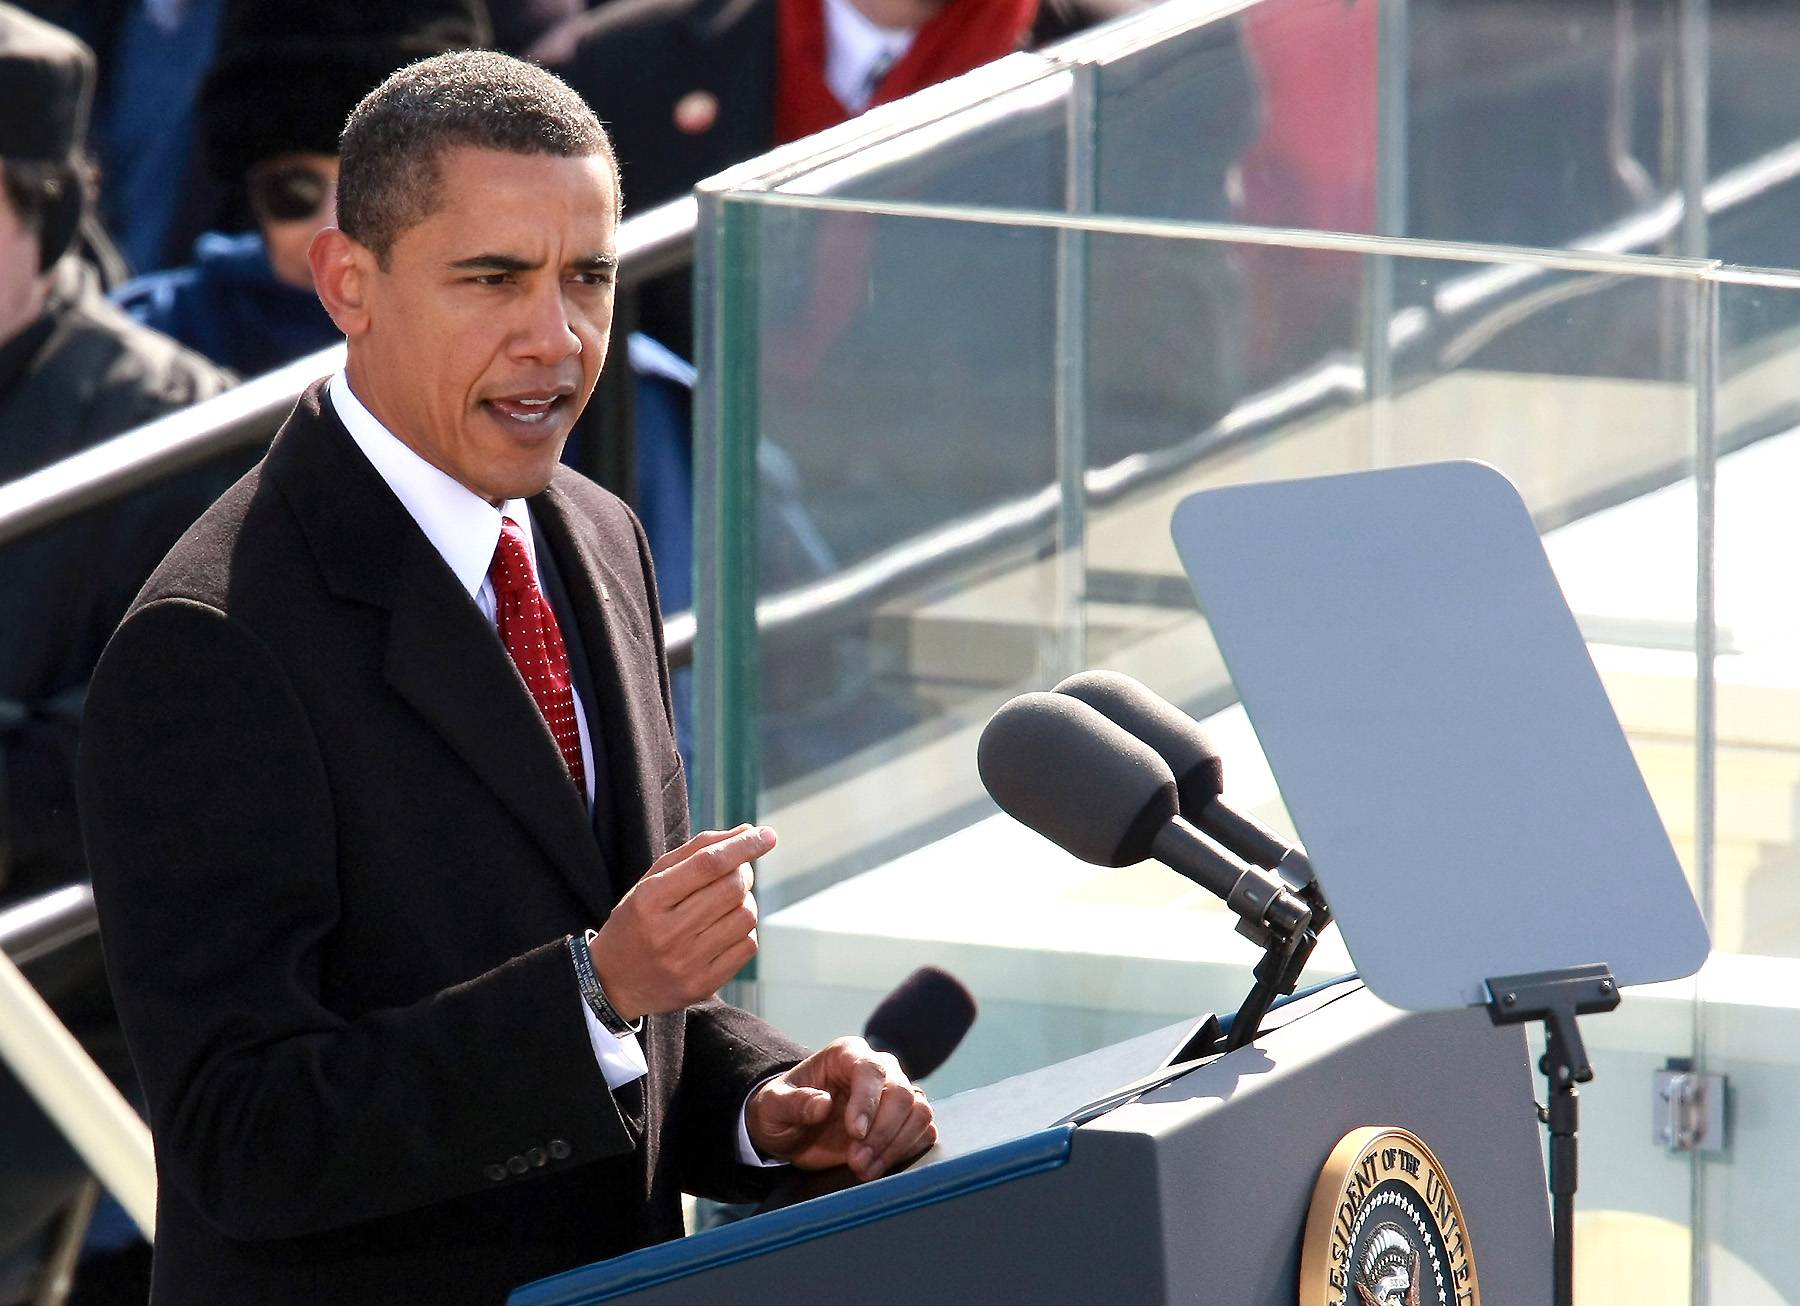 President Obama delivers address at 2009 inauguration ceremony